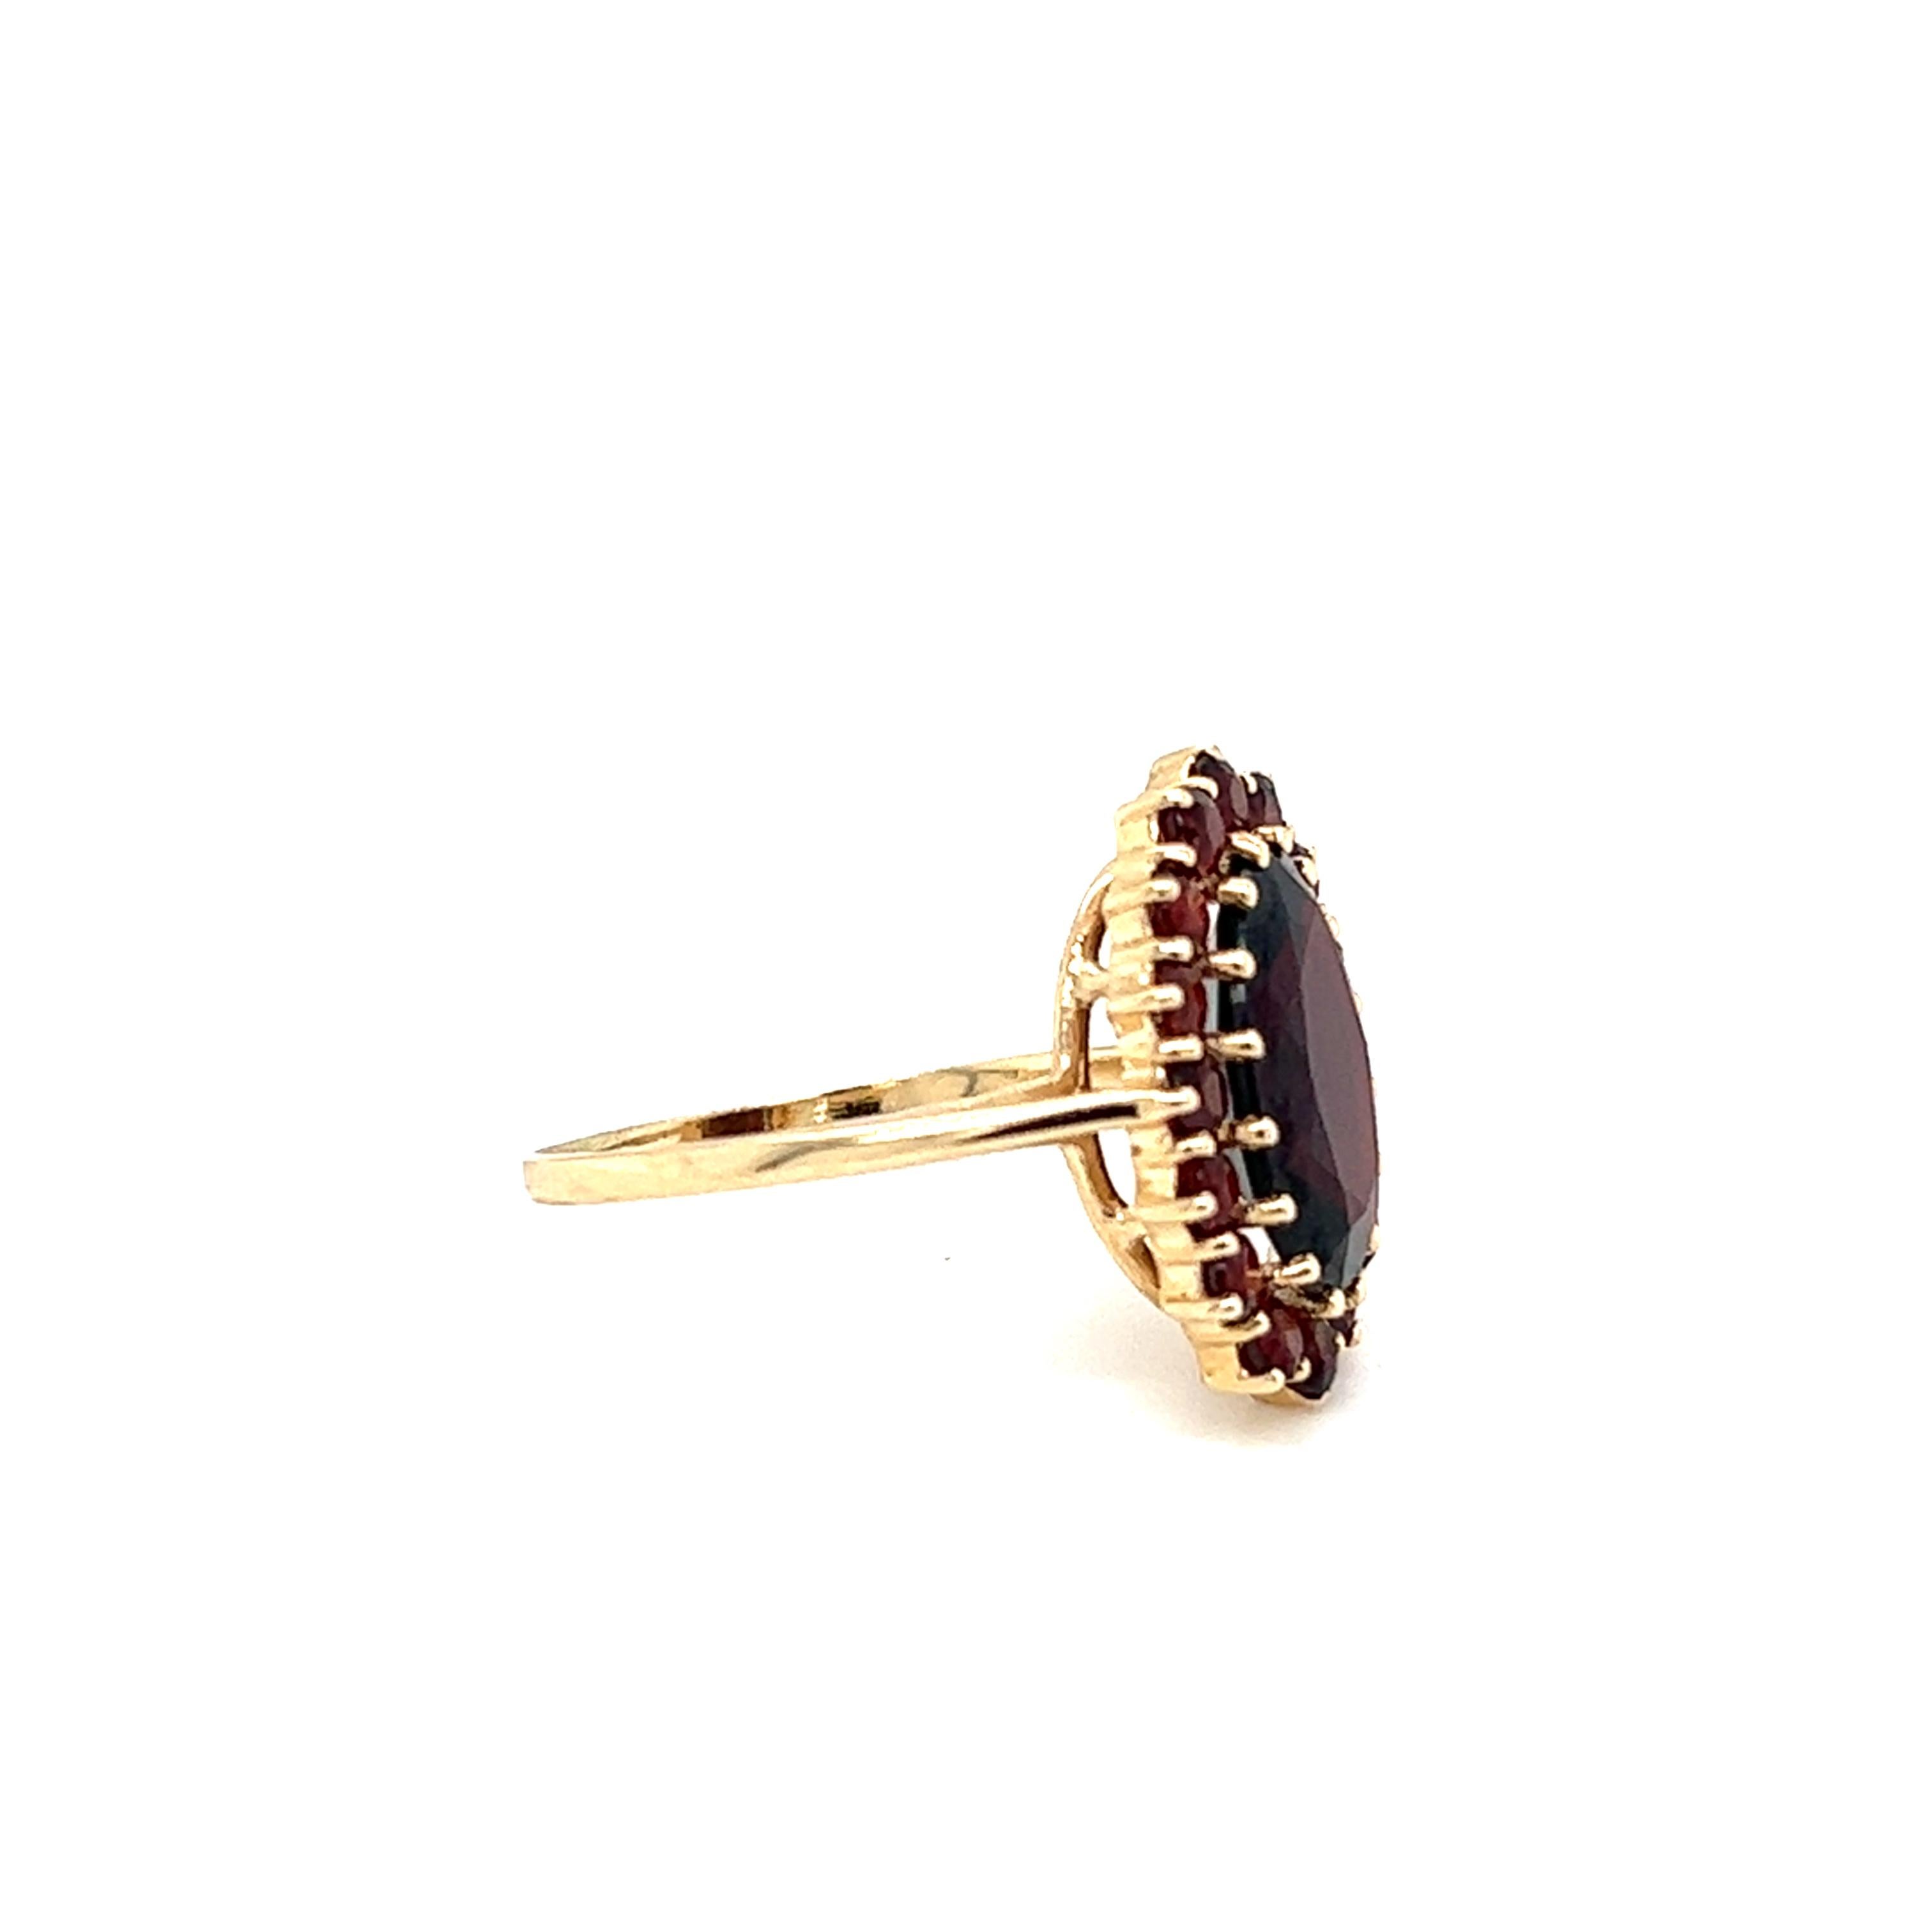 One (1) 10k yellow gold ring featuring one (1) oval spessartite garnet measuring 13.00mmX 8.5mm weighing approximately 5.0 carats and sixteen (16) 2.5mm round faceted spessartite garnets weighing approximately 1.44 carats total weight.  The stones